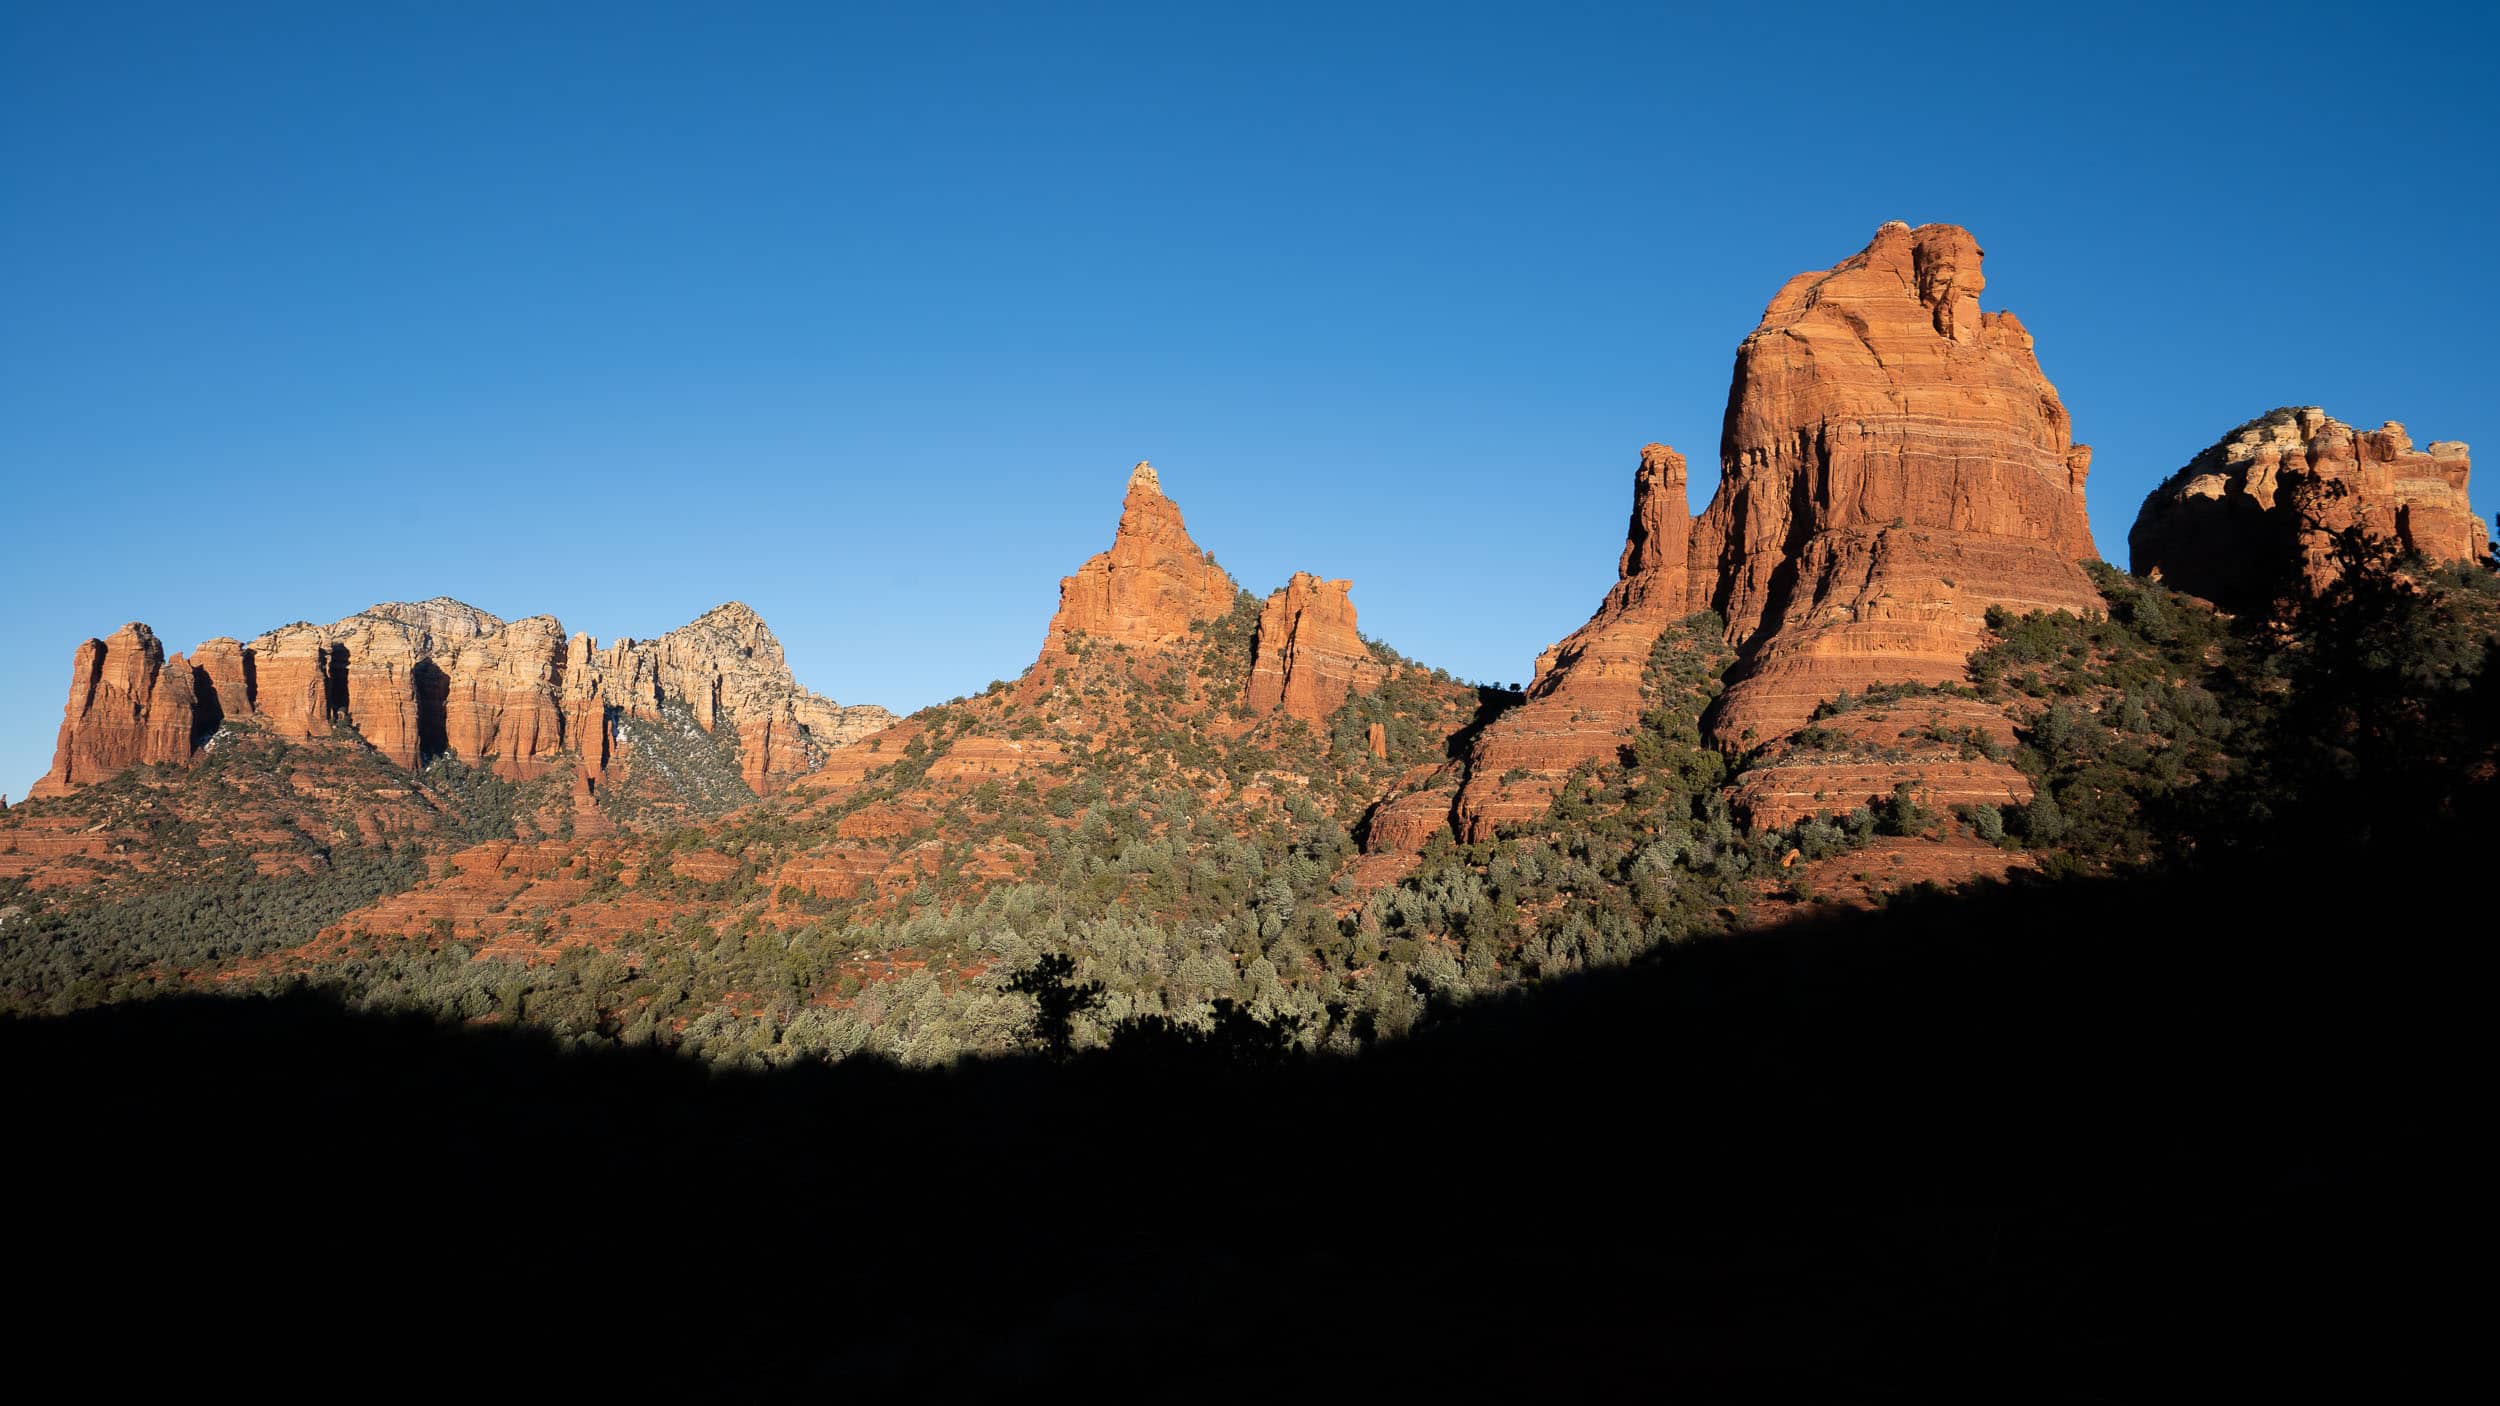 View of red rocks on the Jordan Trail, one of the best easy hikes in Sedona, Arizona